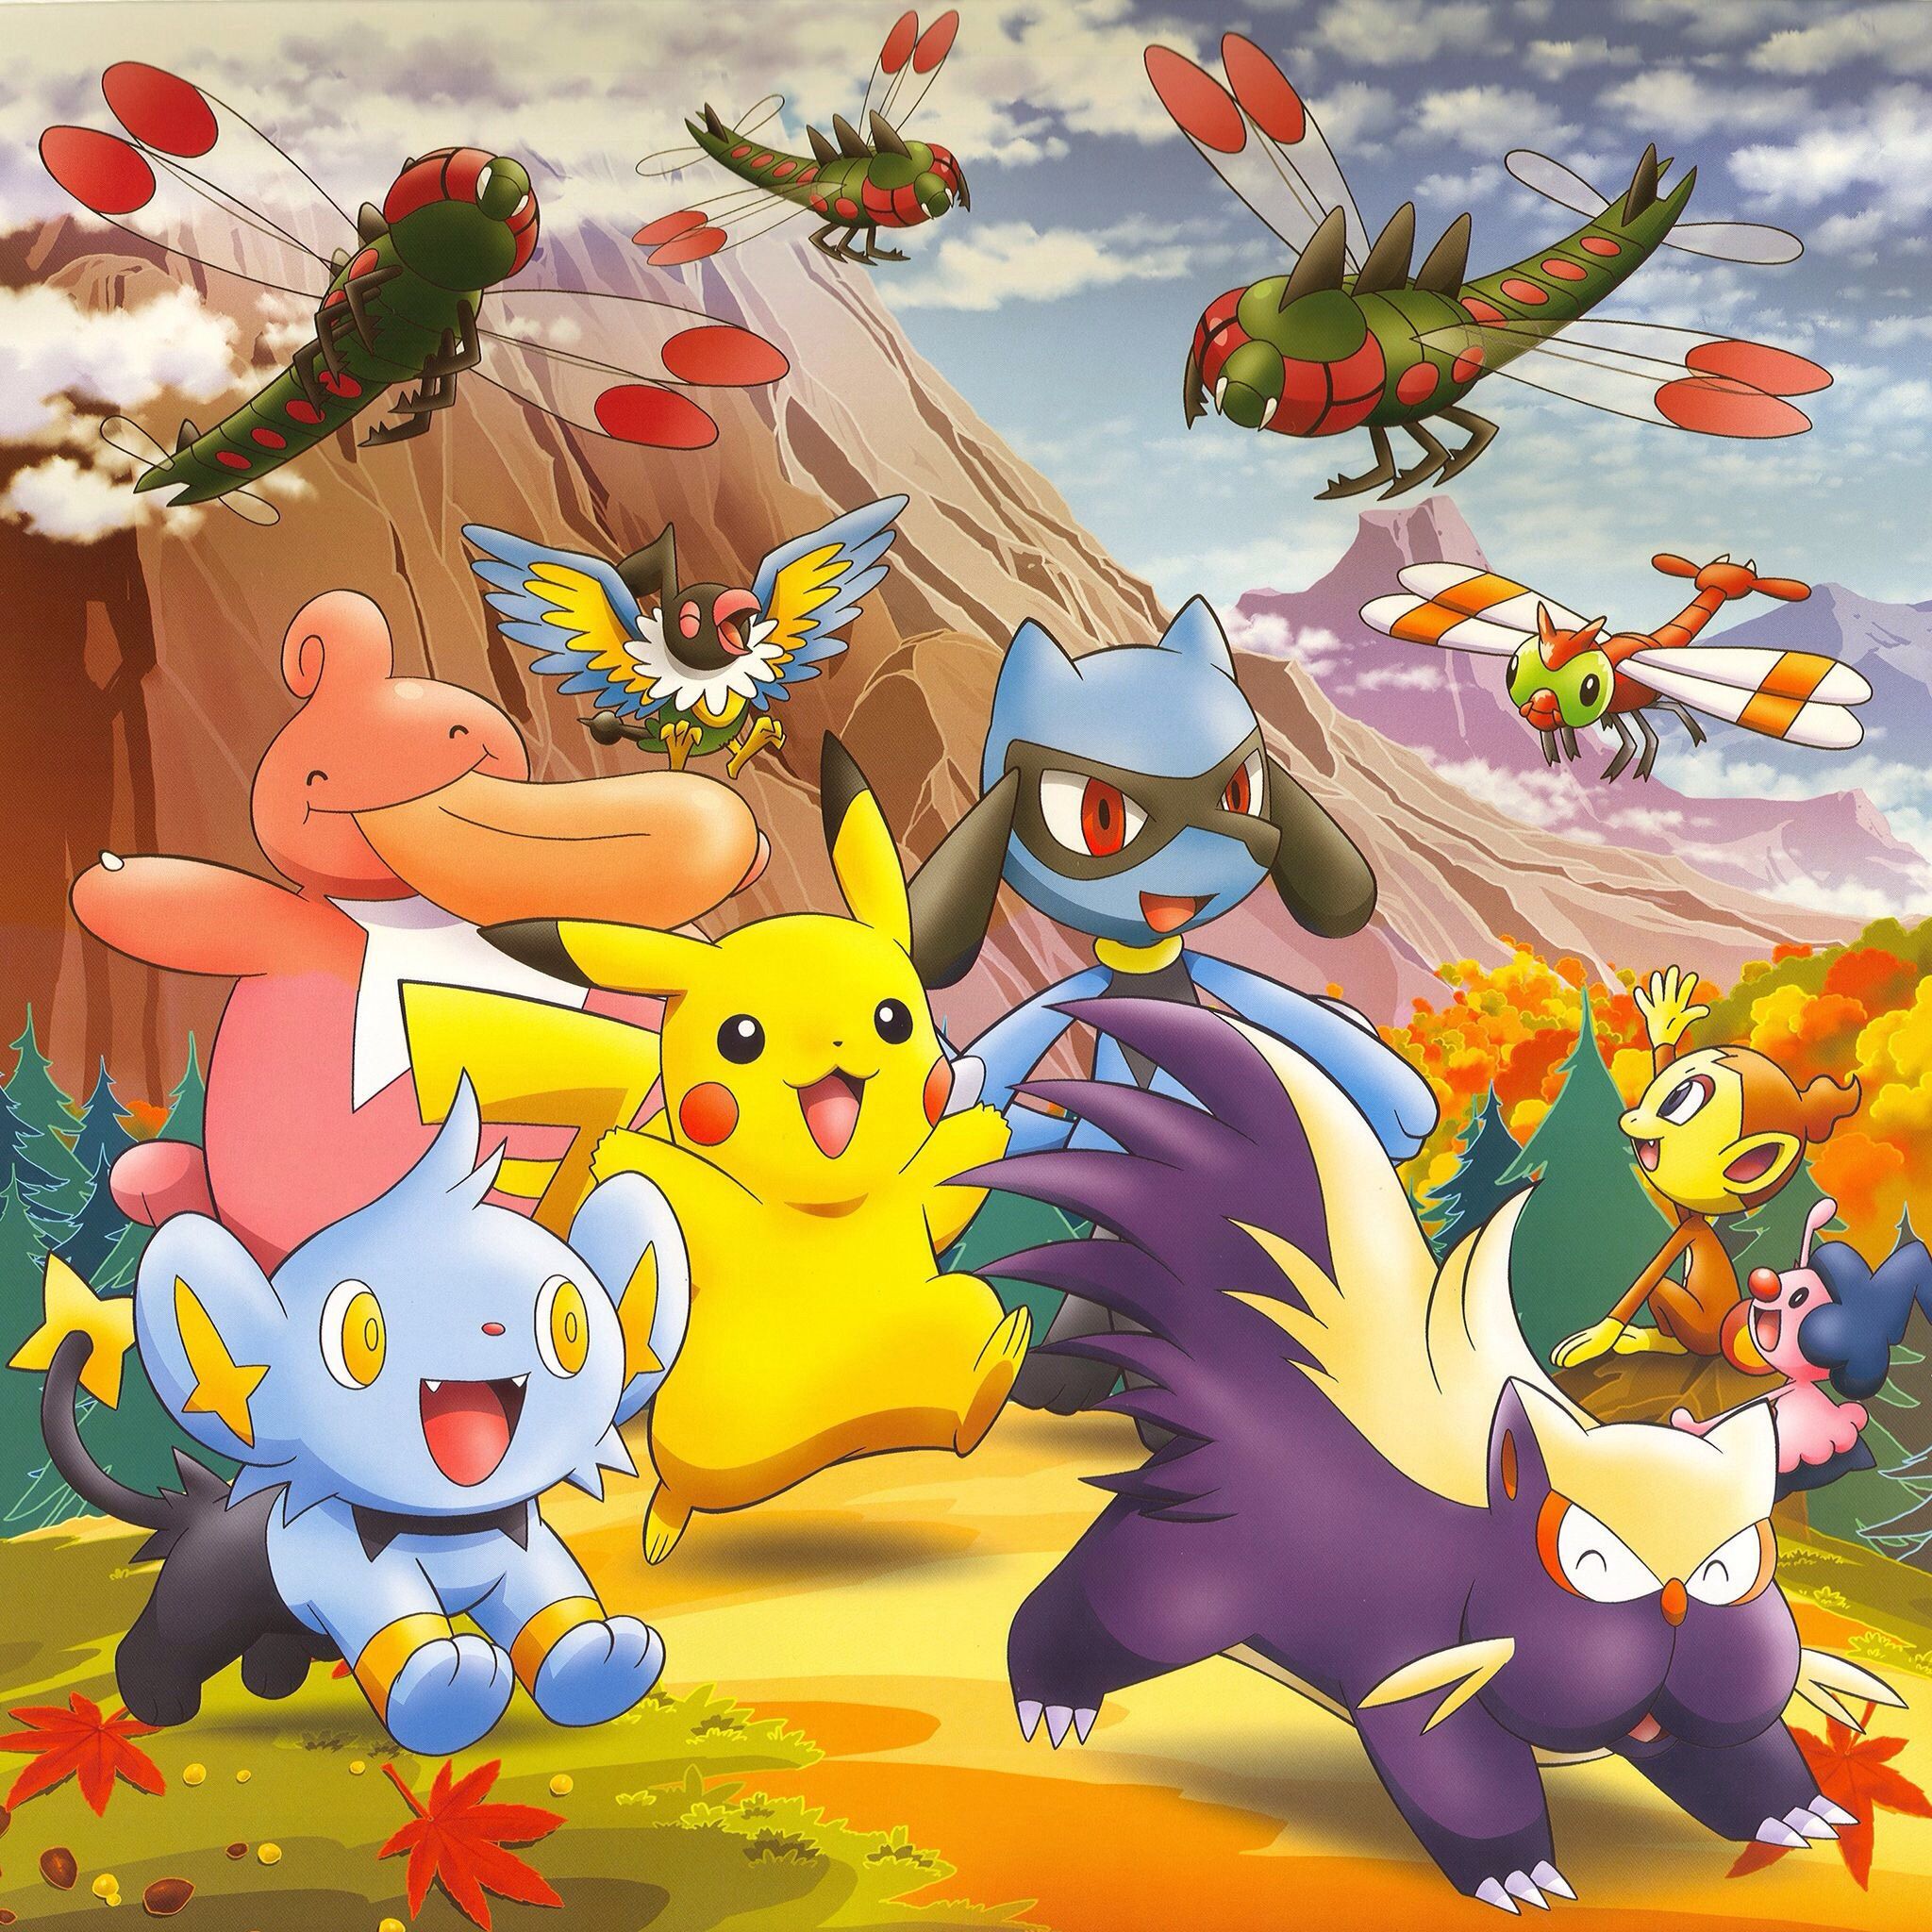 Pikachu and Friends in the Fallémon Photo